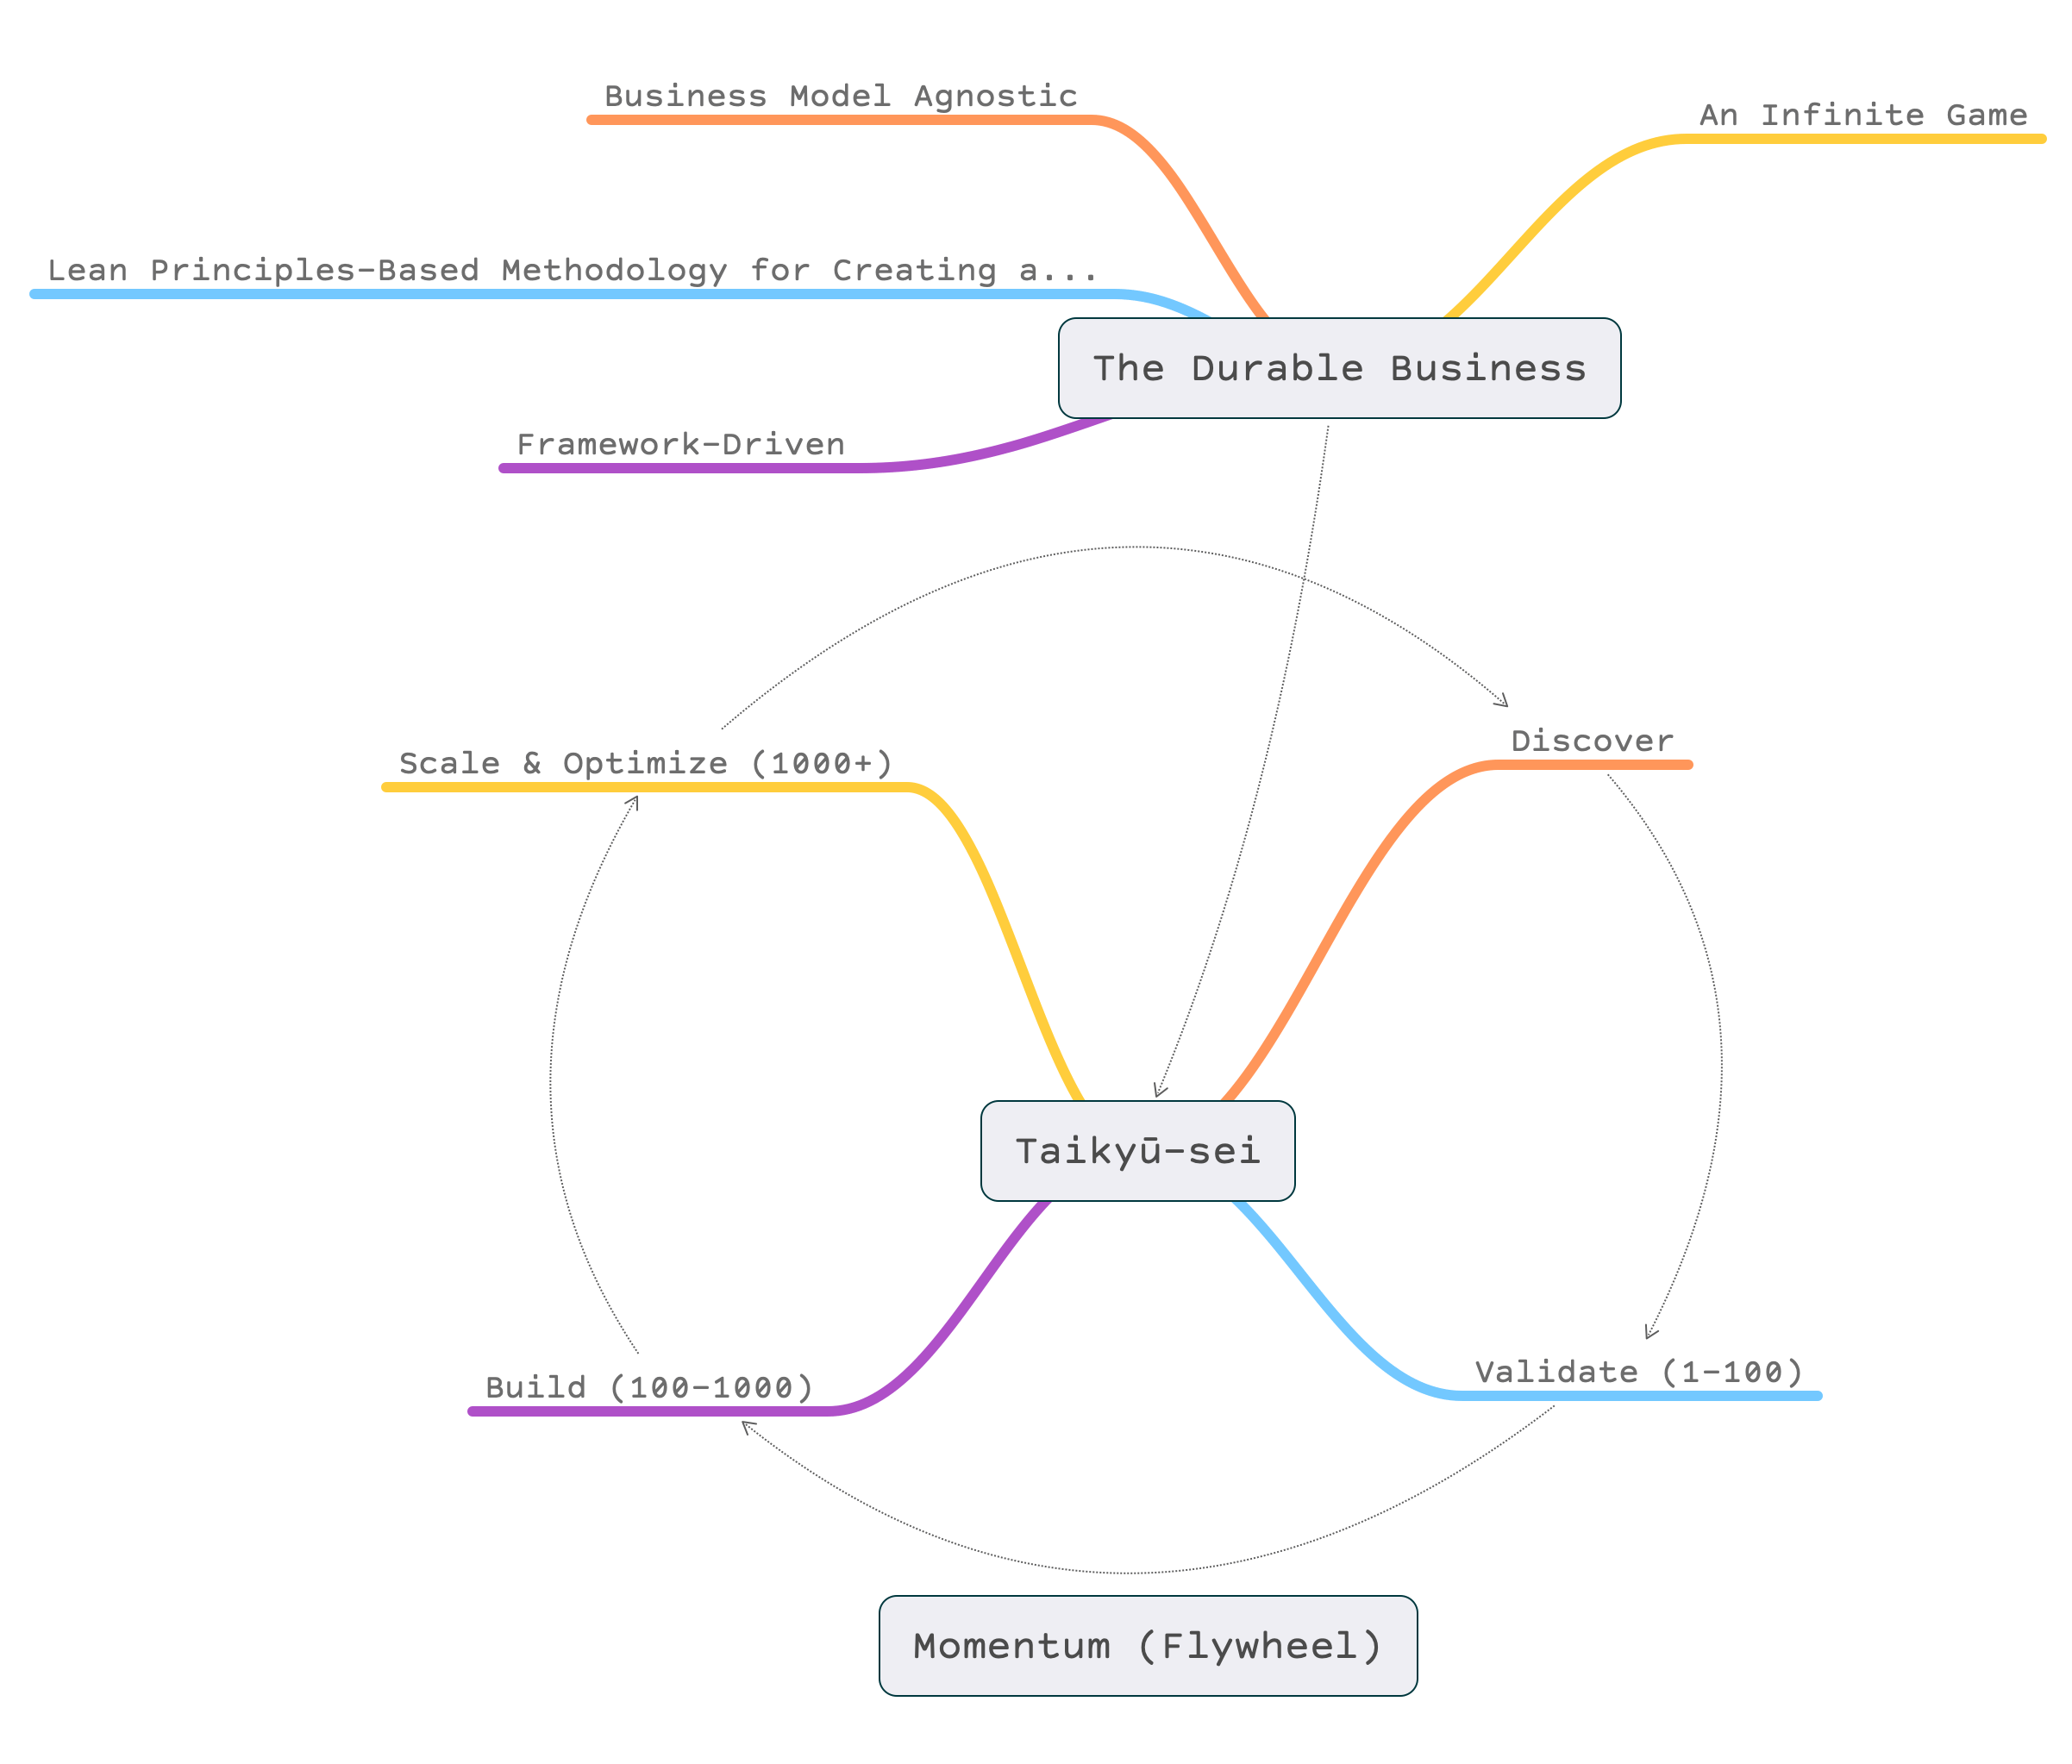 Mind Map of The Durable Business